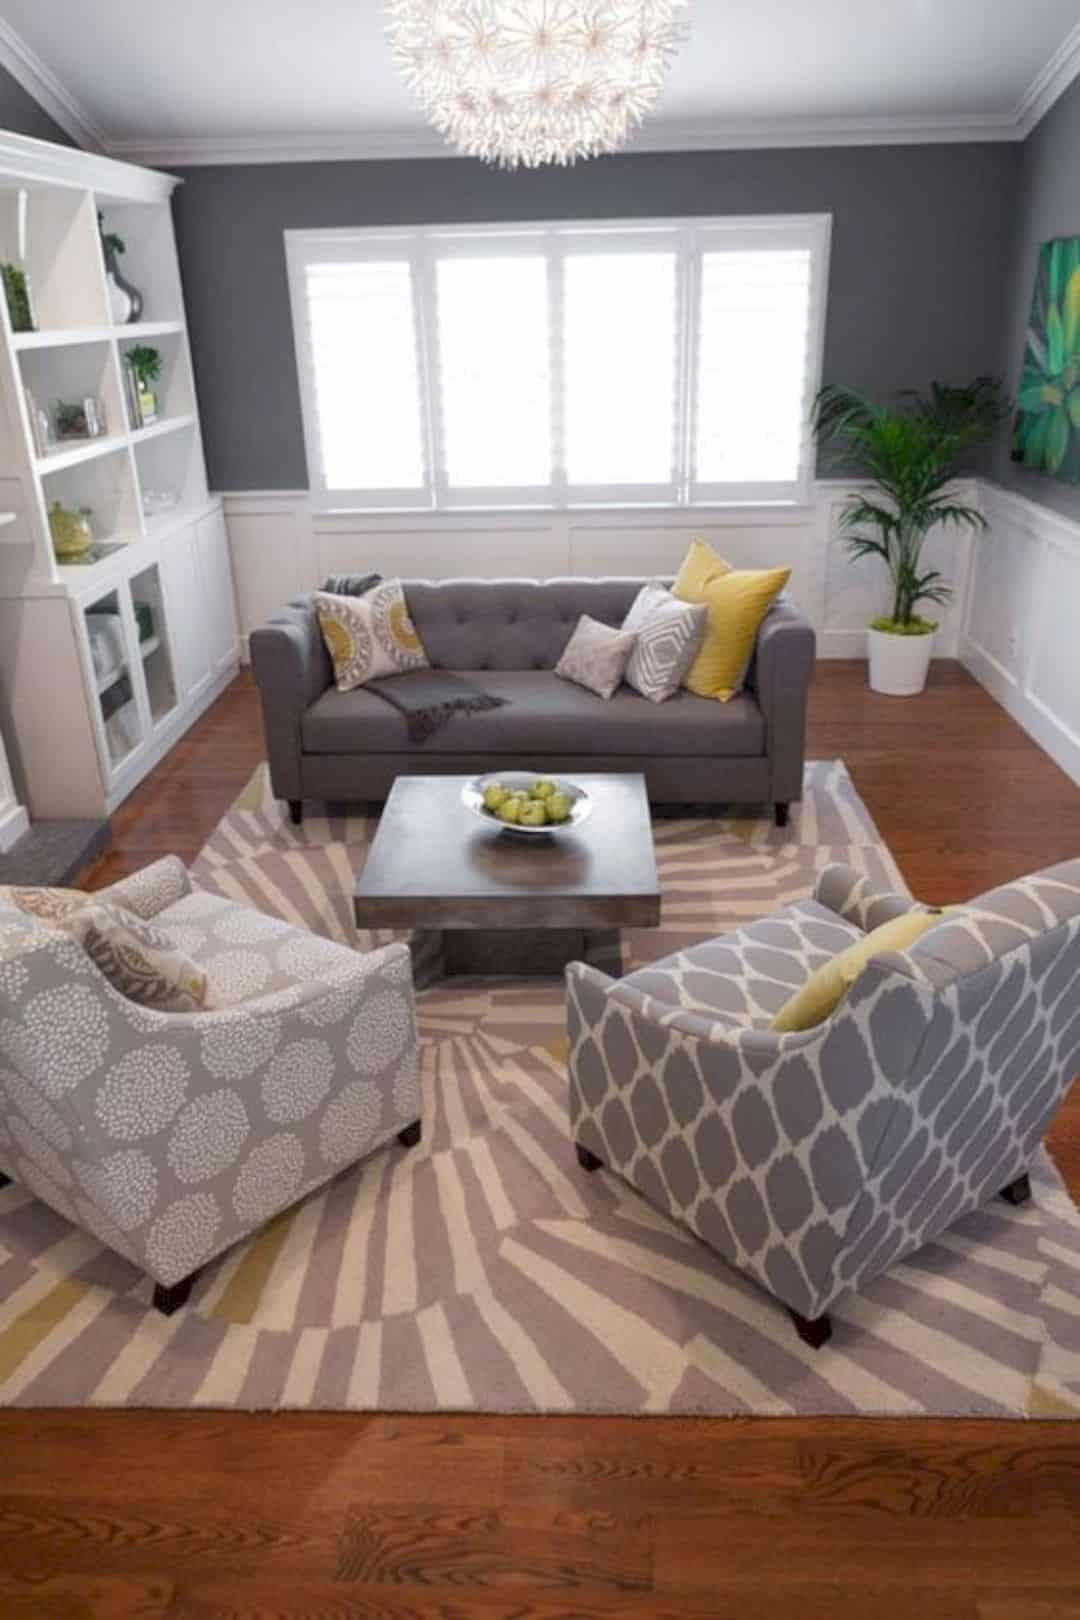 Small Space Living Room Furniture
 16 Top Small Living Room Furniture Ideas Futurist